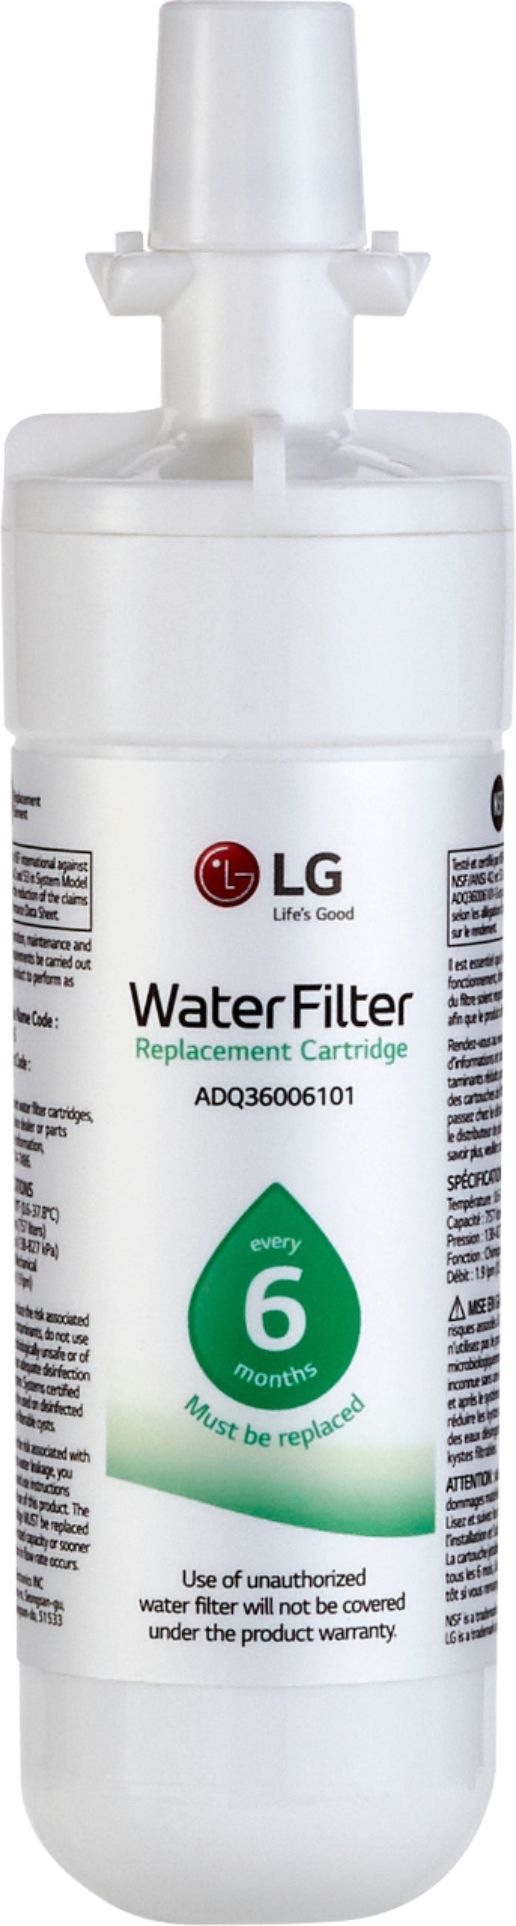 Best Buy essentials™ NSF 42/53 Water Filter Replacement for Select  Whirlpool, KitchenAid and Sears/Kenmore Refrigerators White BE-WP508531 -  Best Buy